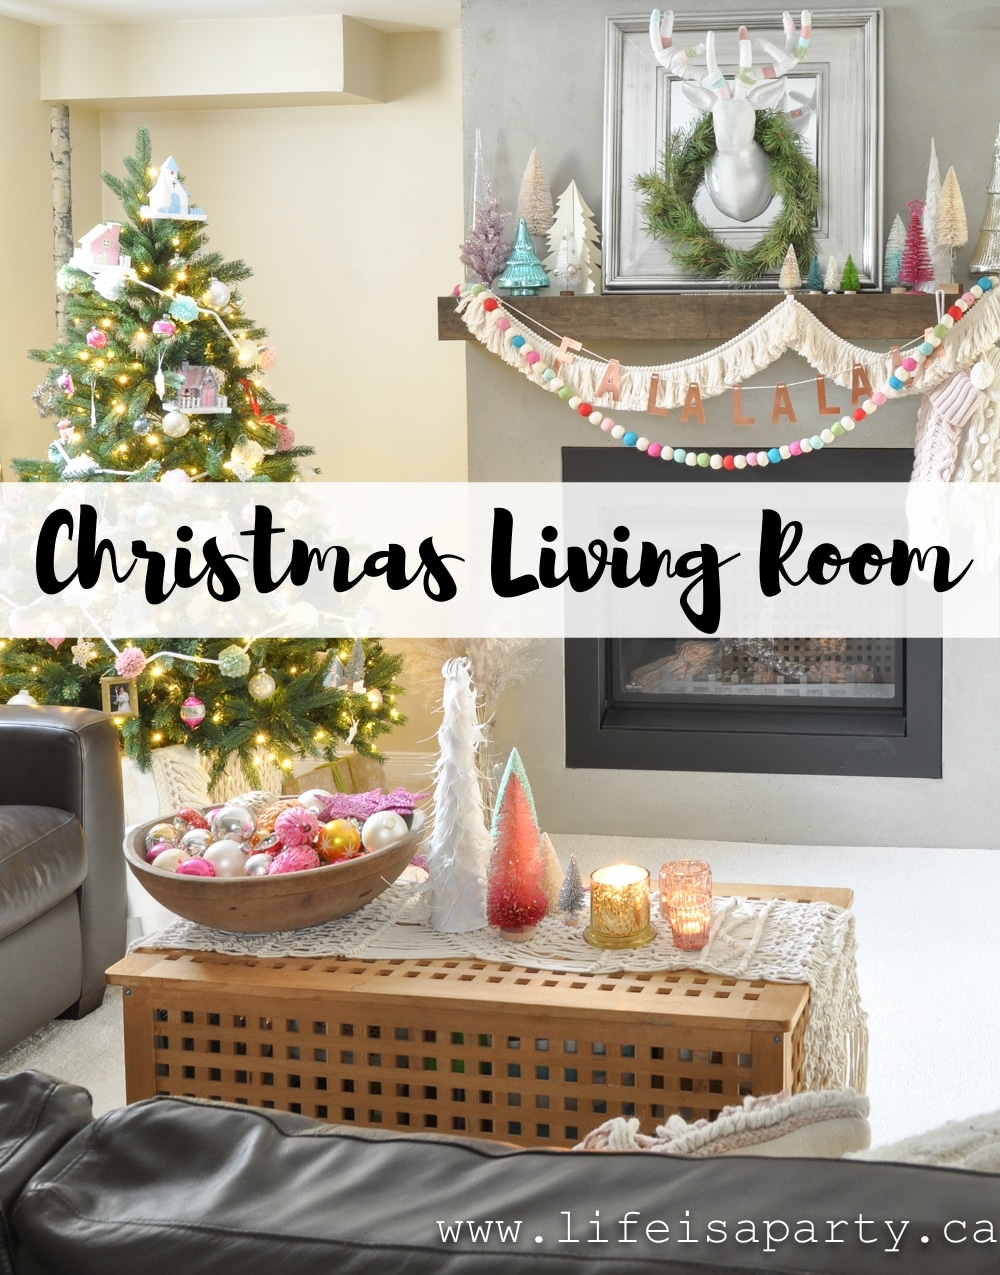 Colourful Christmas Family Room: Inspired by Anthropologie, with bottle brush Christmas trees, mercury glass, vintage ornaments, macrame, & pastel colours.